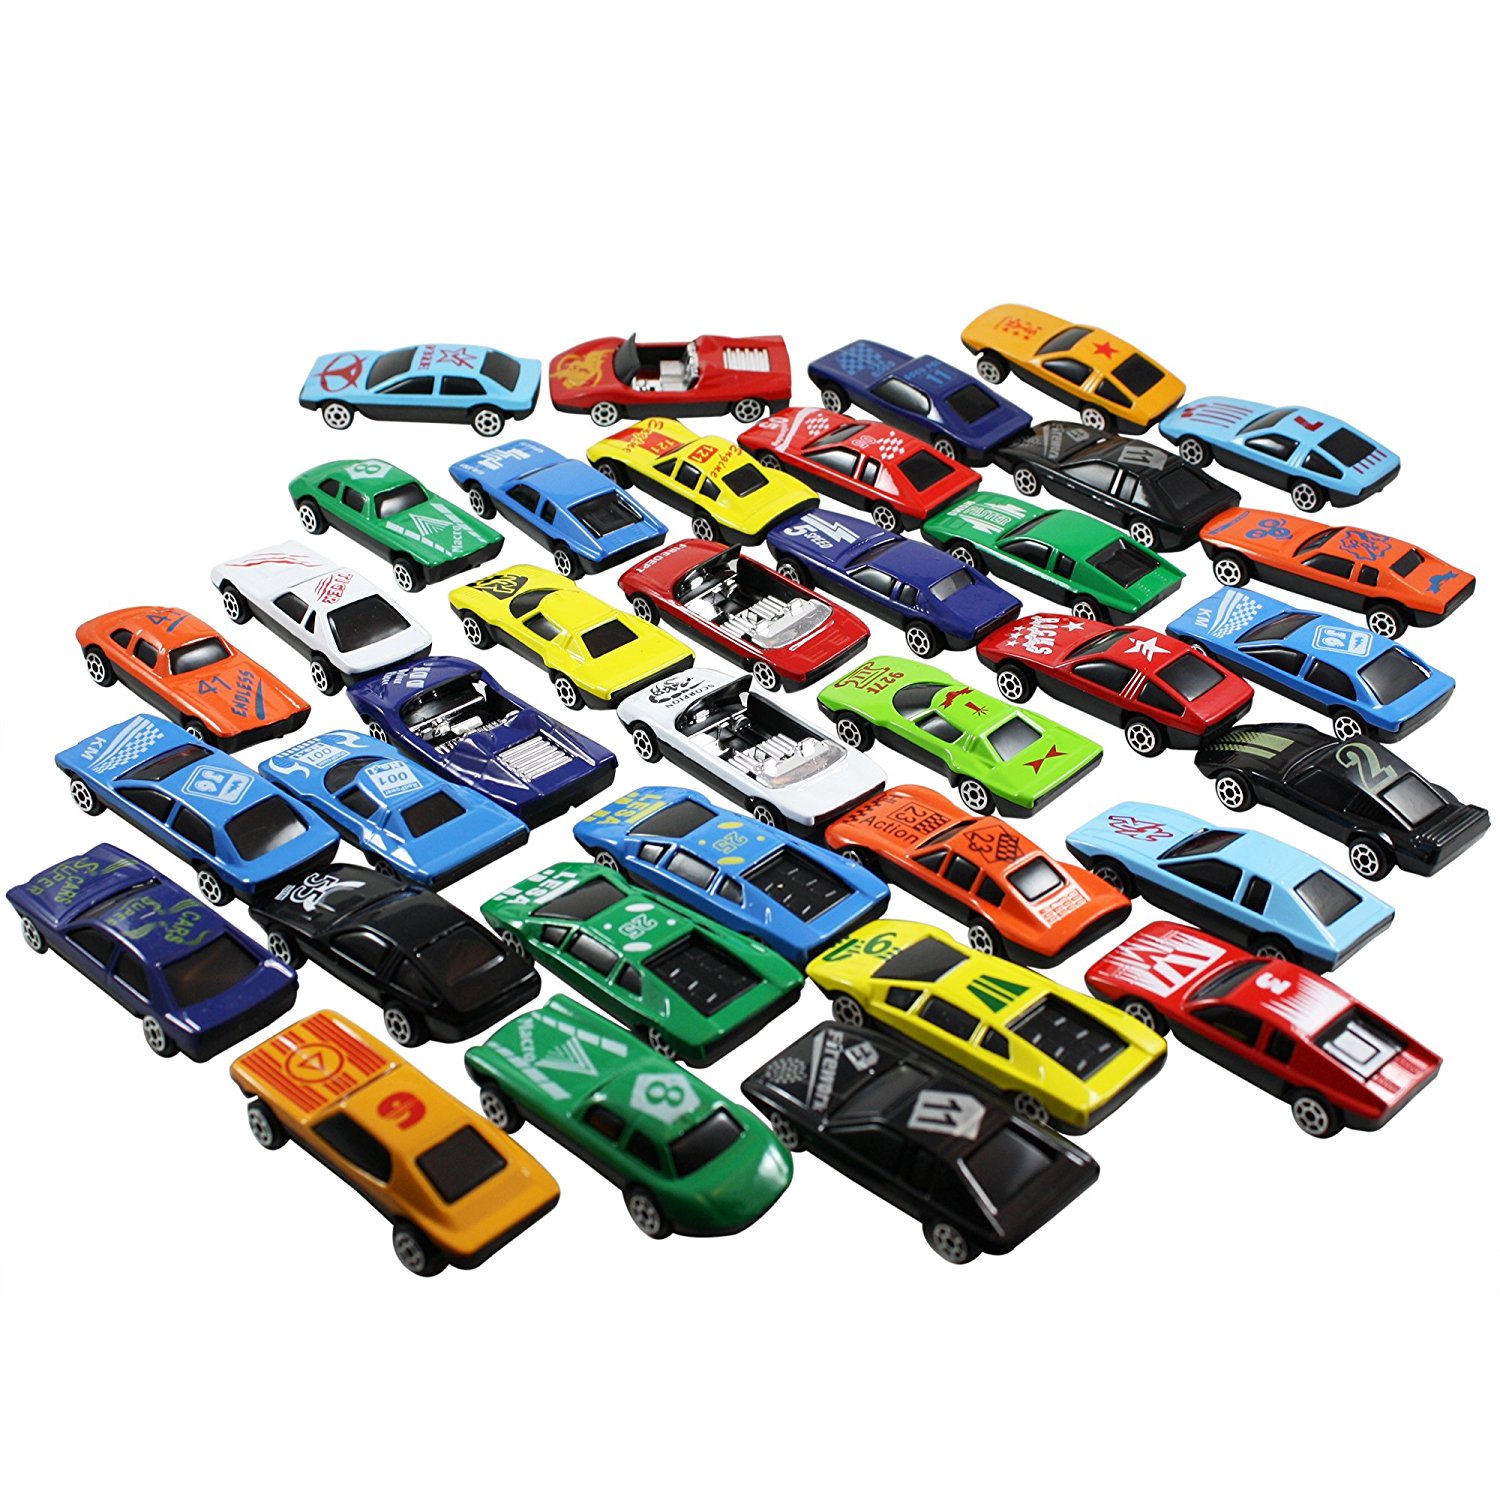 Amazon.com: Race Car Toys Assorted for Kids, Boys or Girls - Free ...